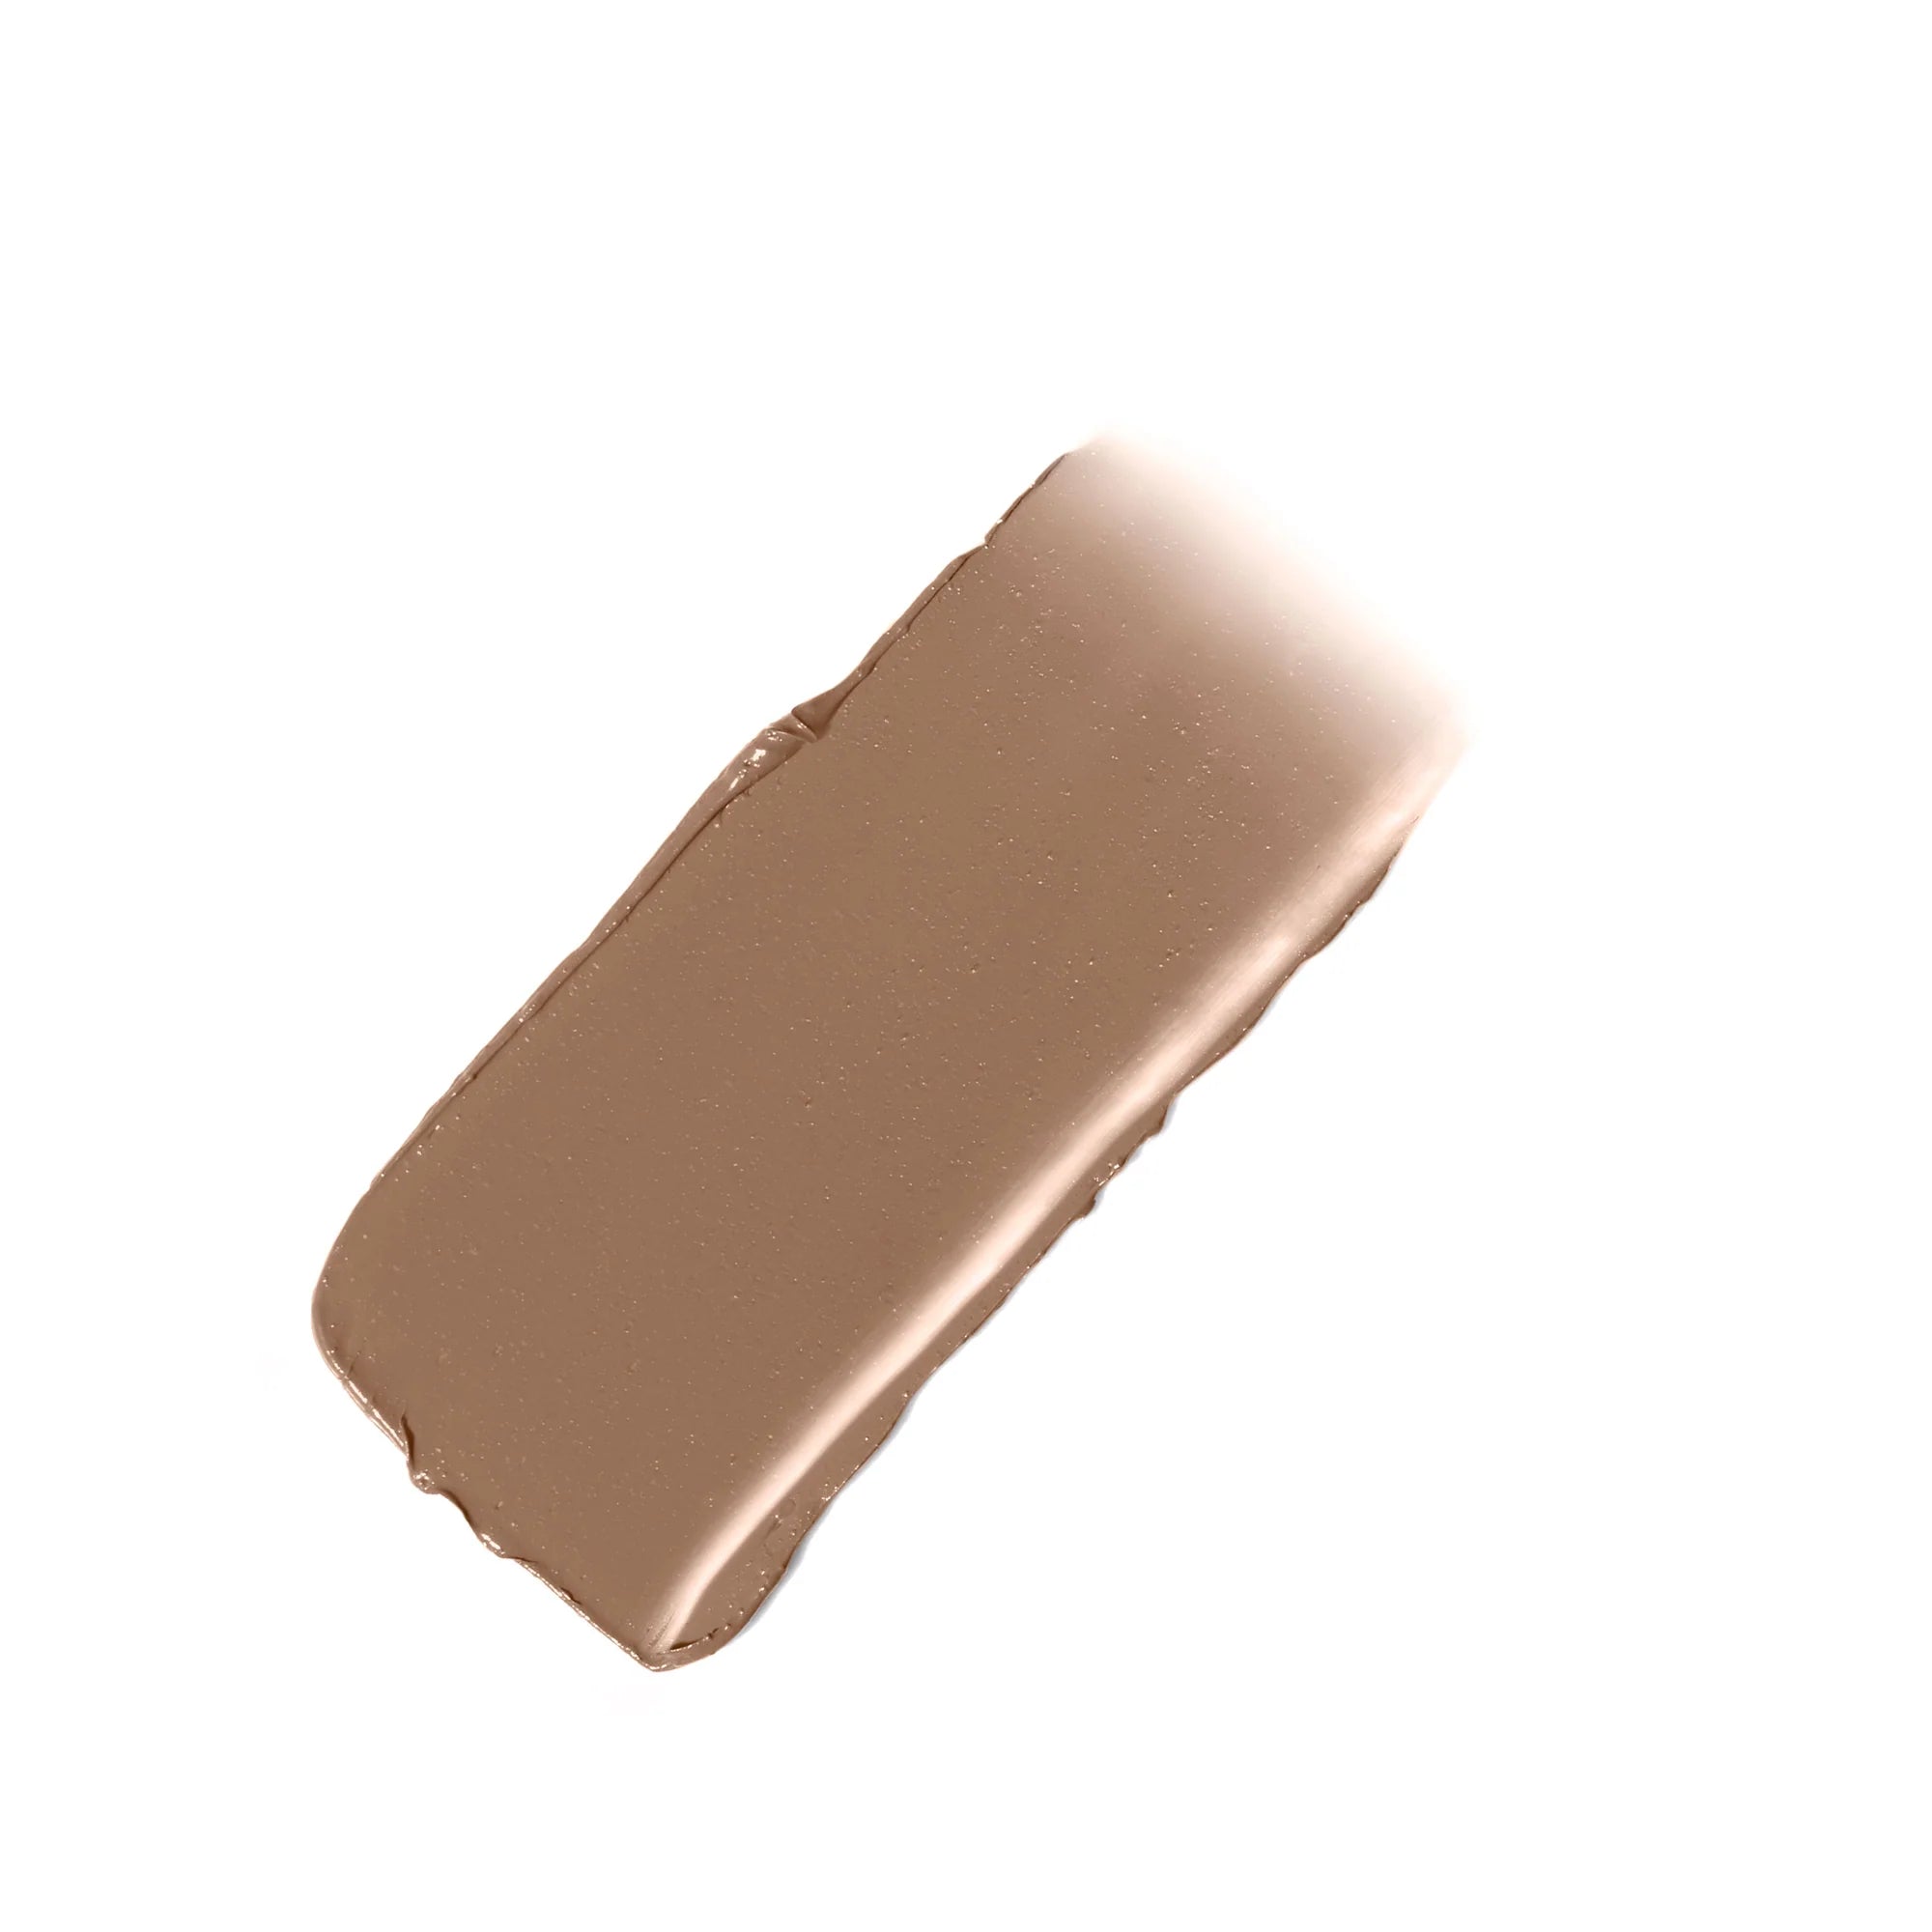 Jane Iredale's Glow Time™ Bronzer Stick - shade Sizzle - golden bronze ideal for light to medium skin tones